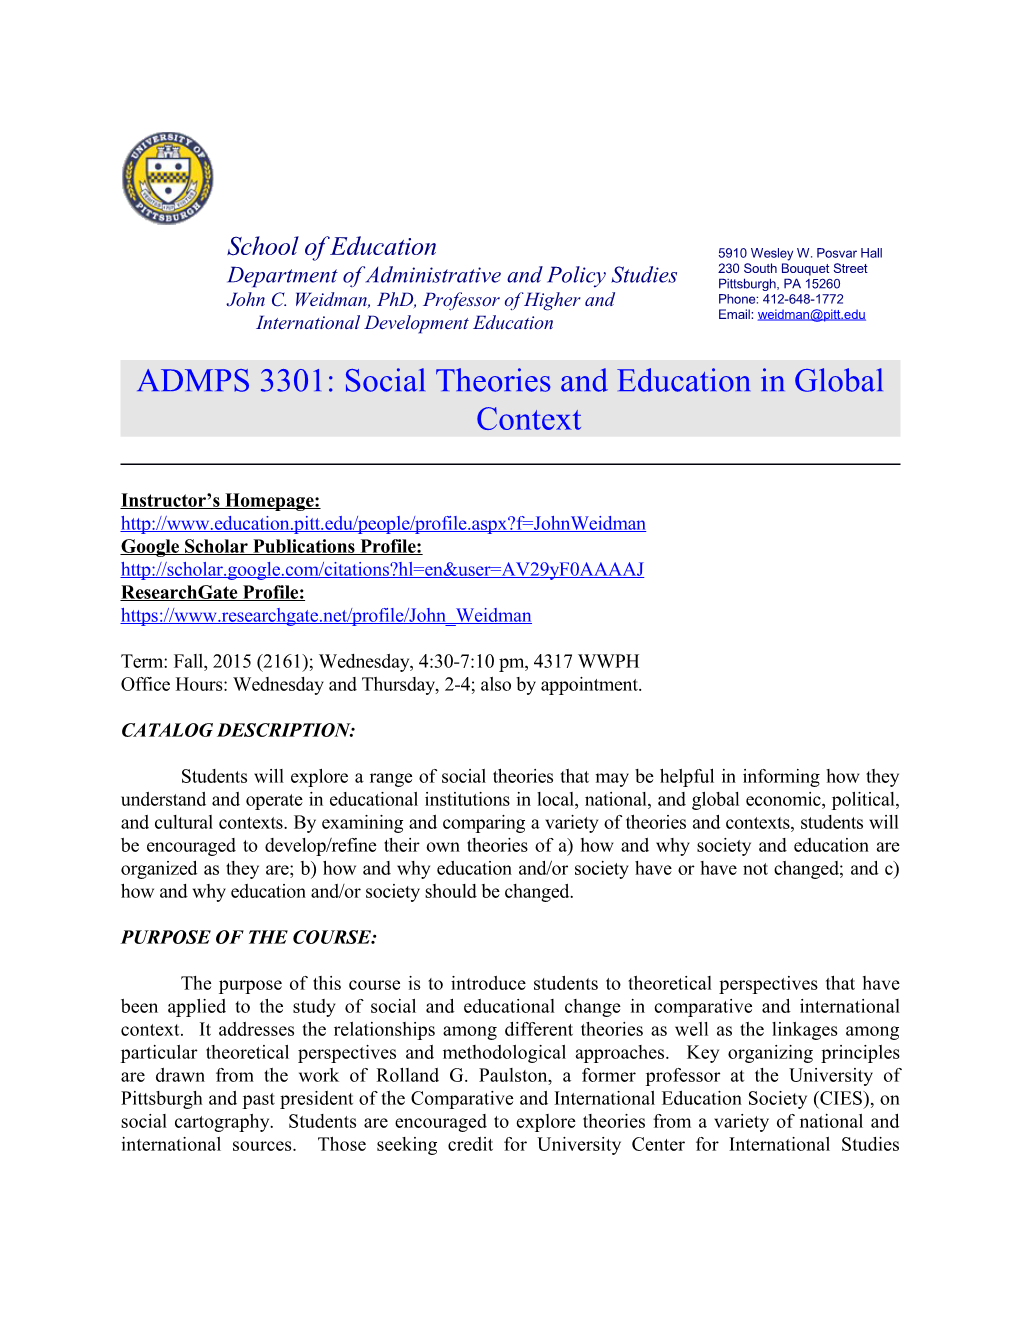 ADMPS 3301: Social Theories and Education in Global Context